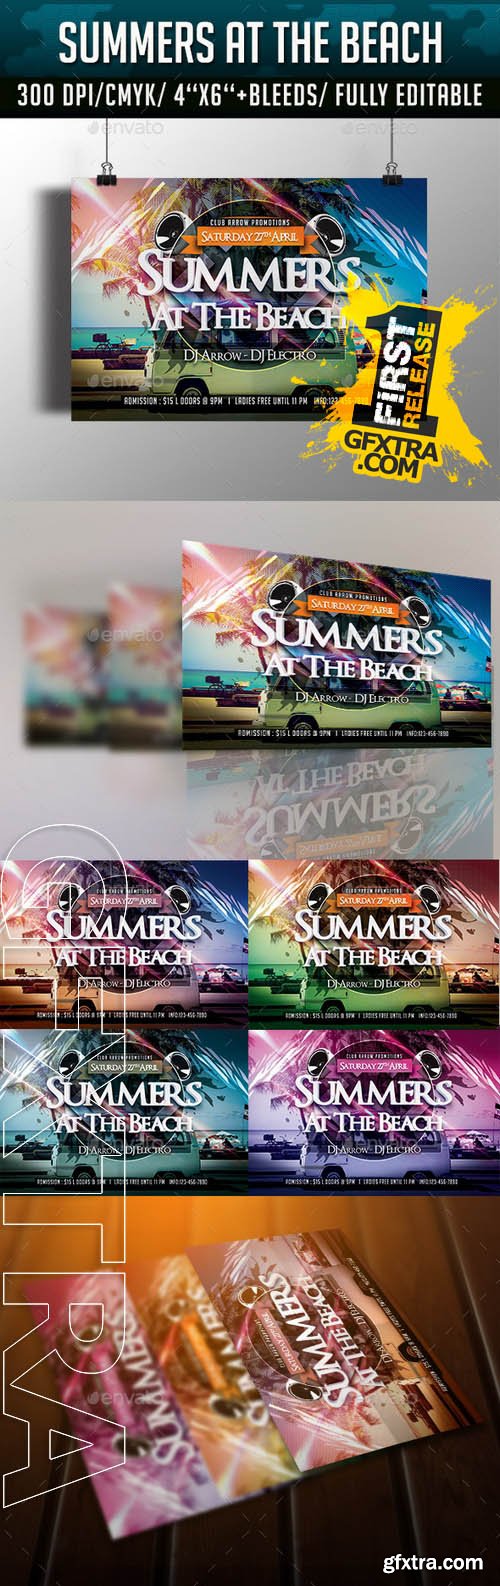 Summers at the Beach Flyer Template - Graphicriver 10949615